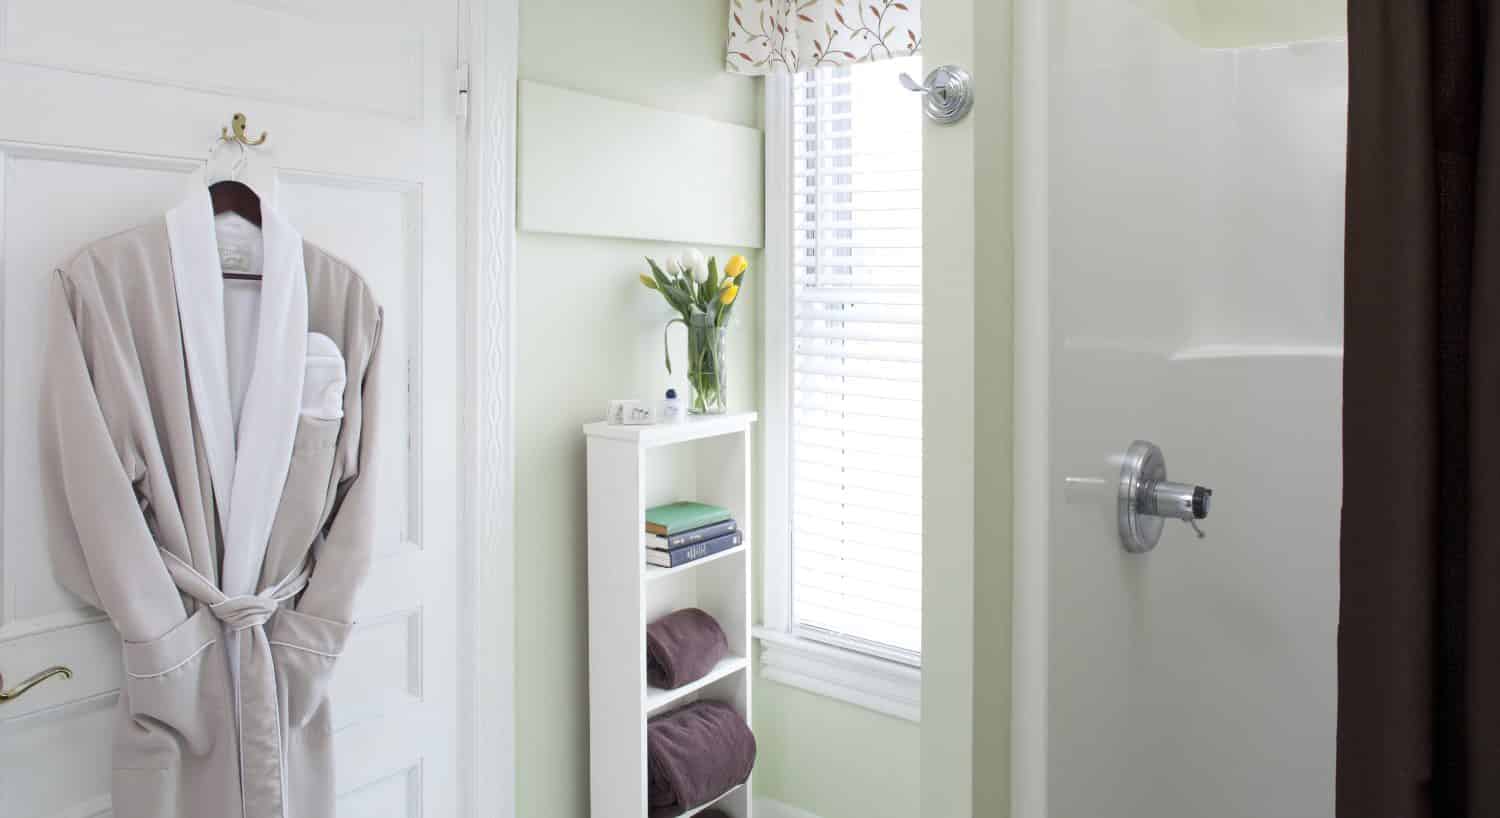 Bathroom with stand up shower, light lime green walls, white trim, and tan robe hanging on a hook